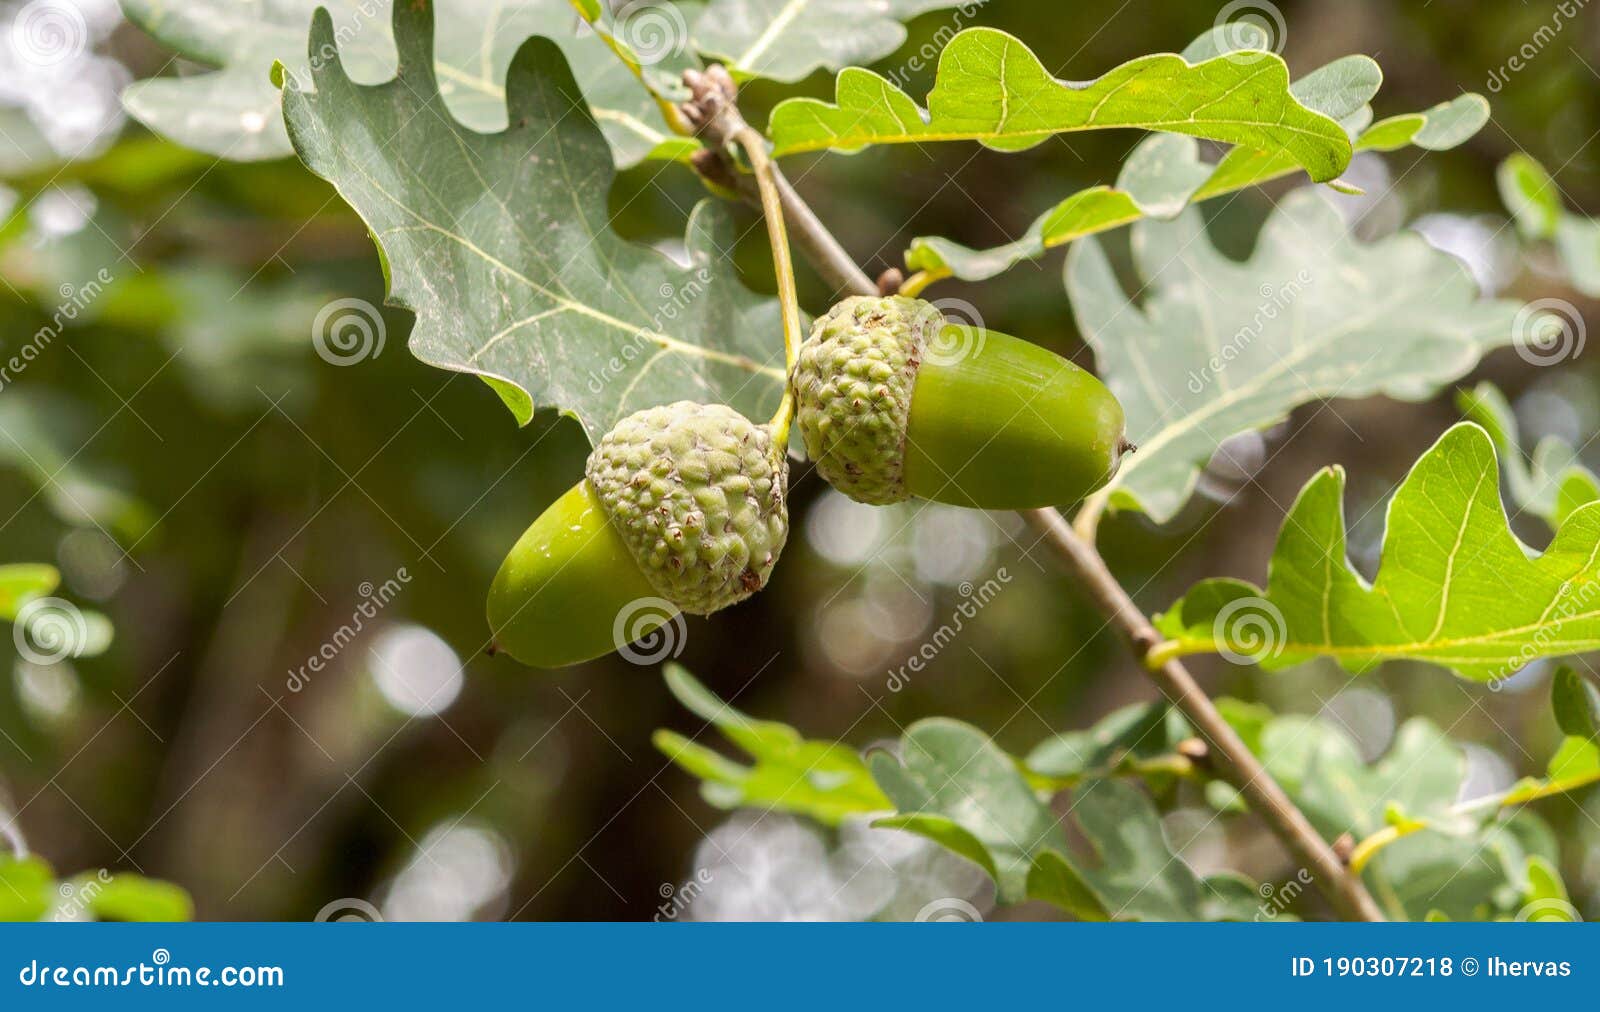 leaves and fruits of common oak, quercus robur